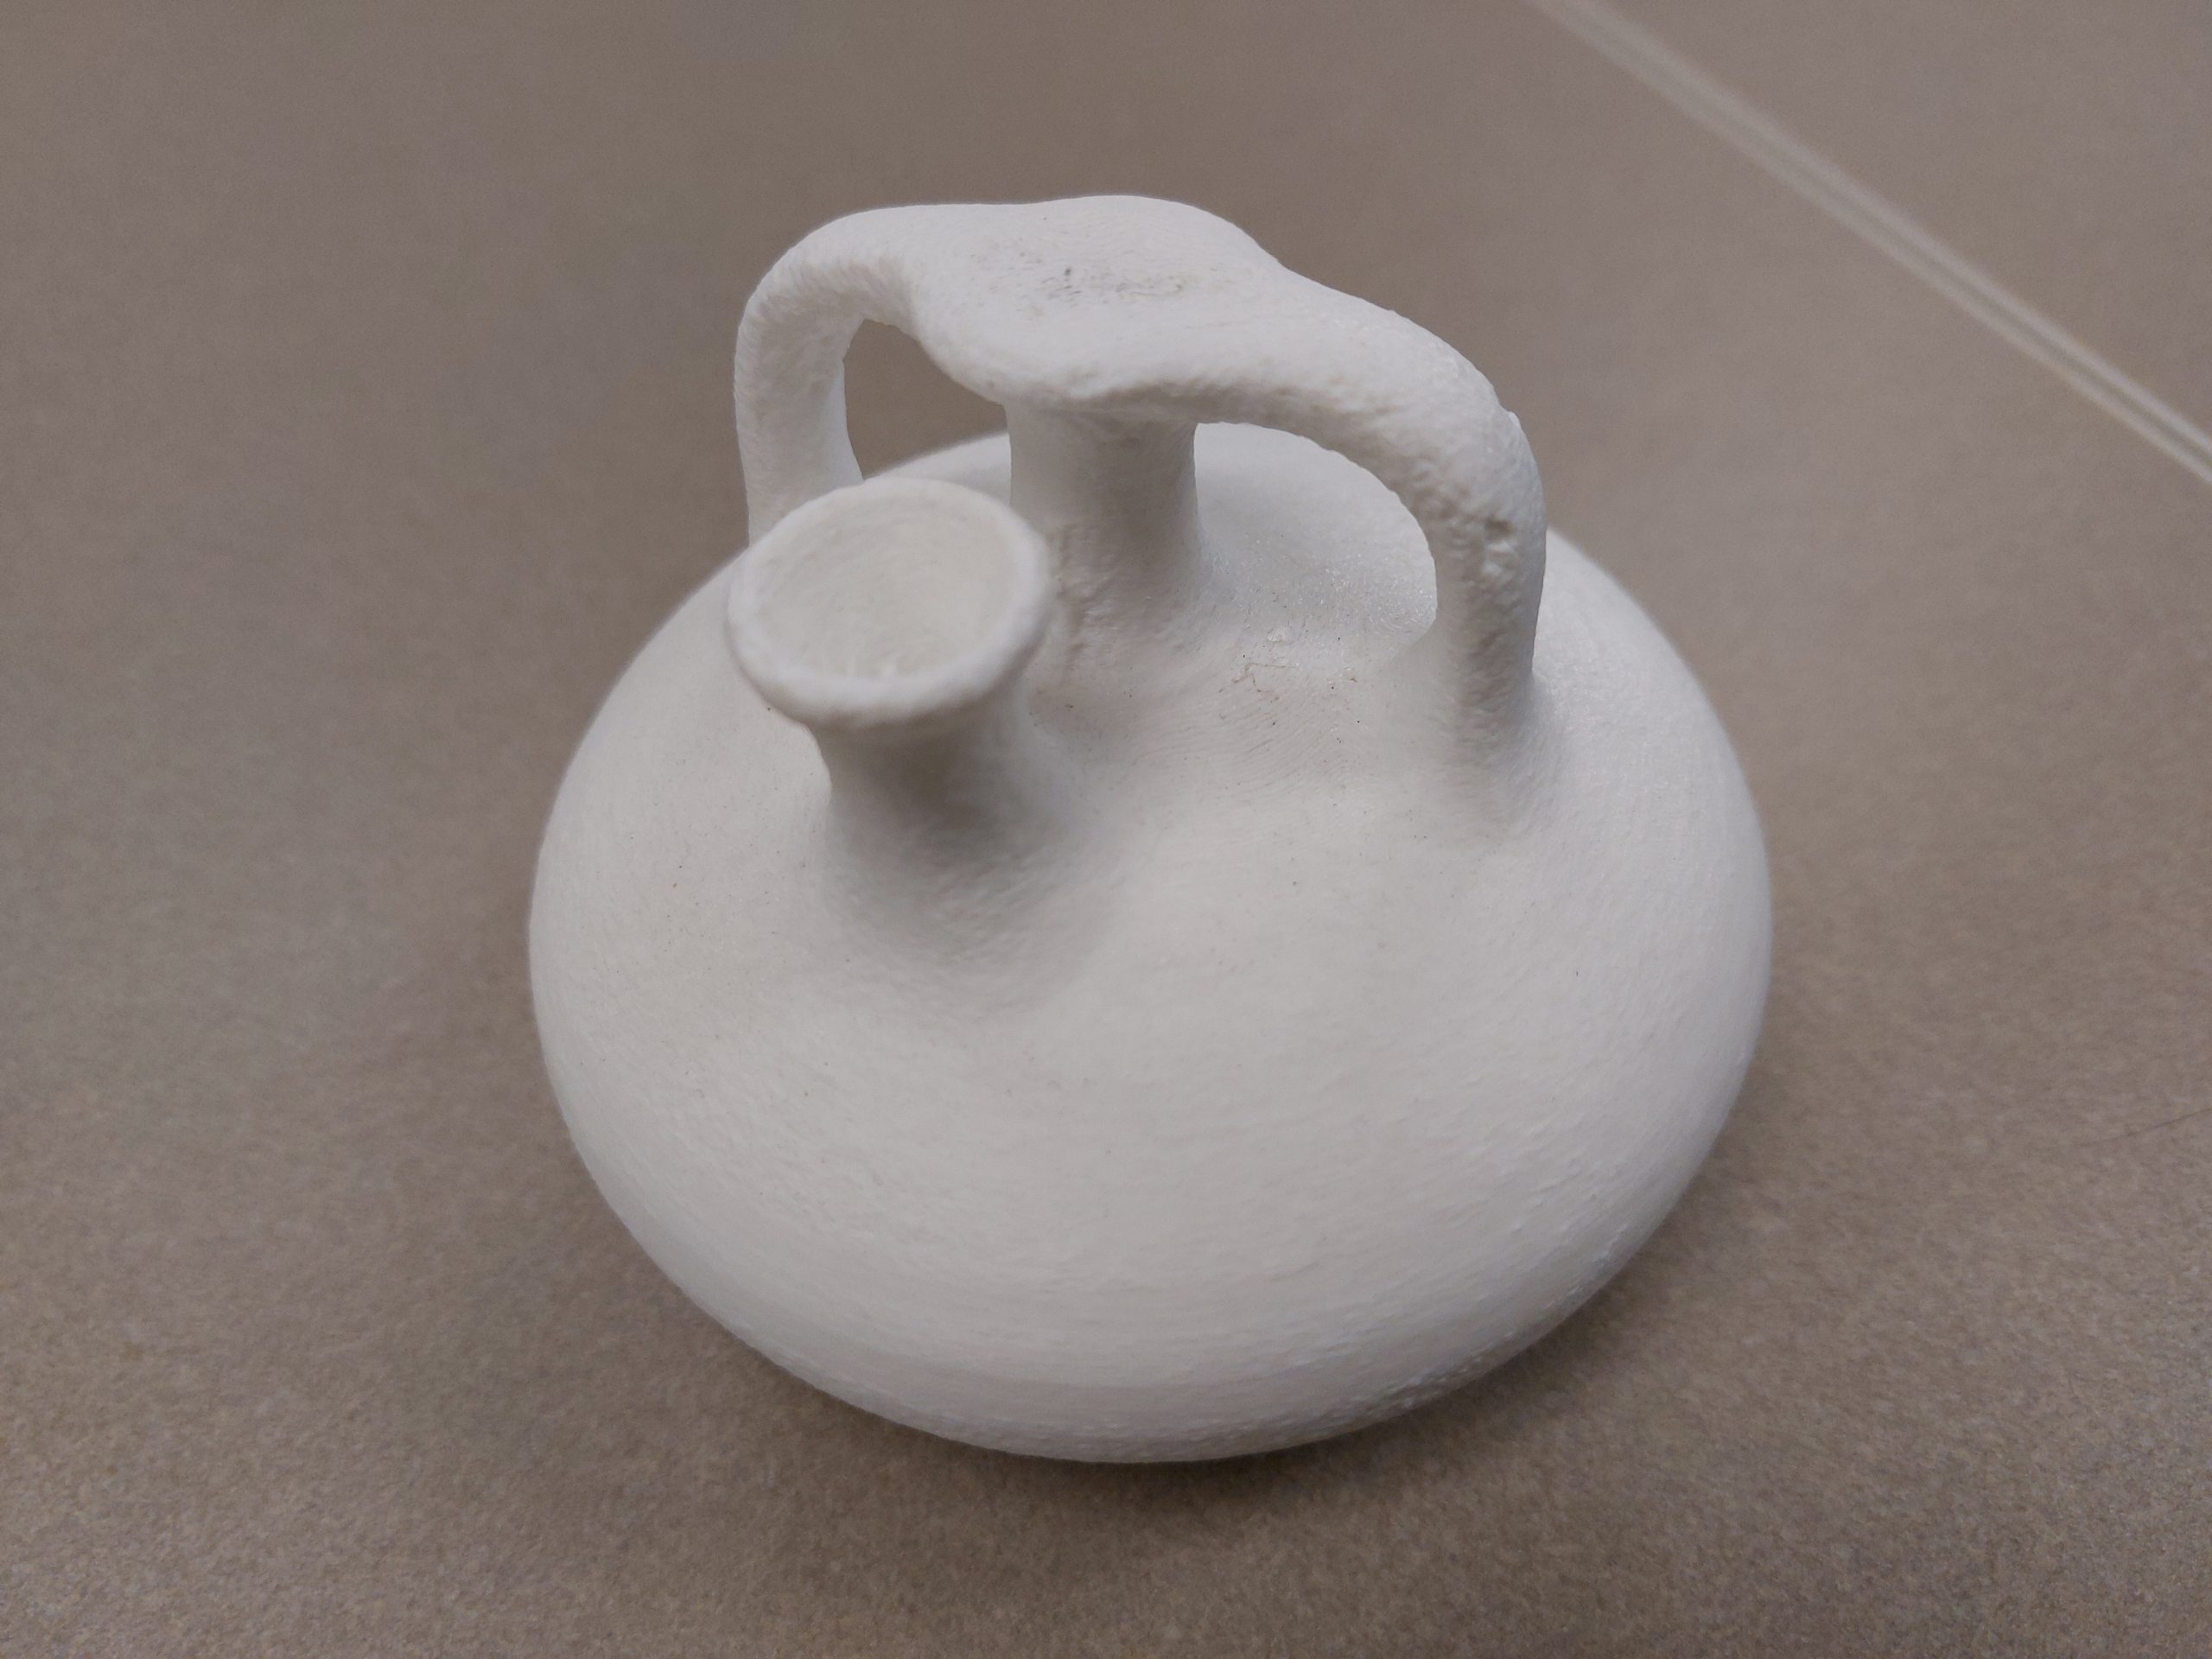 A 3D model of pottery found at a site